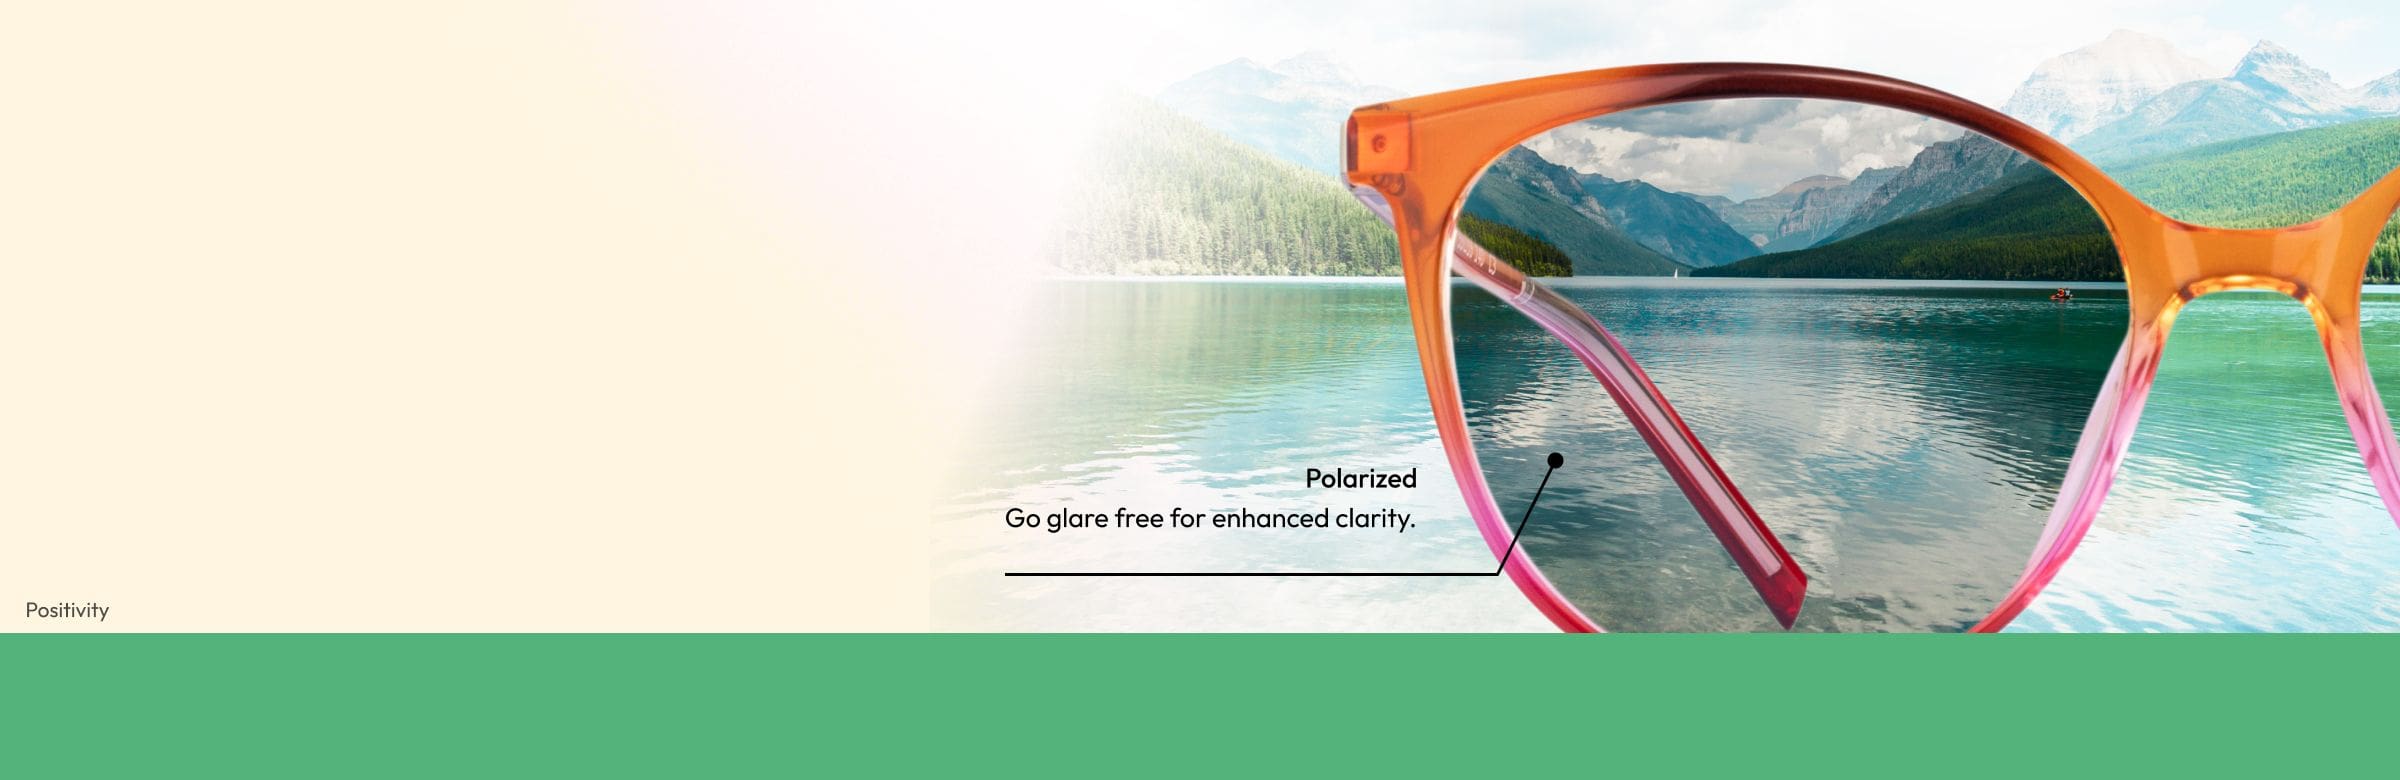 Glare-free views from $49.